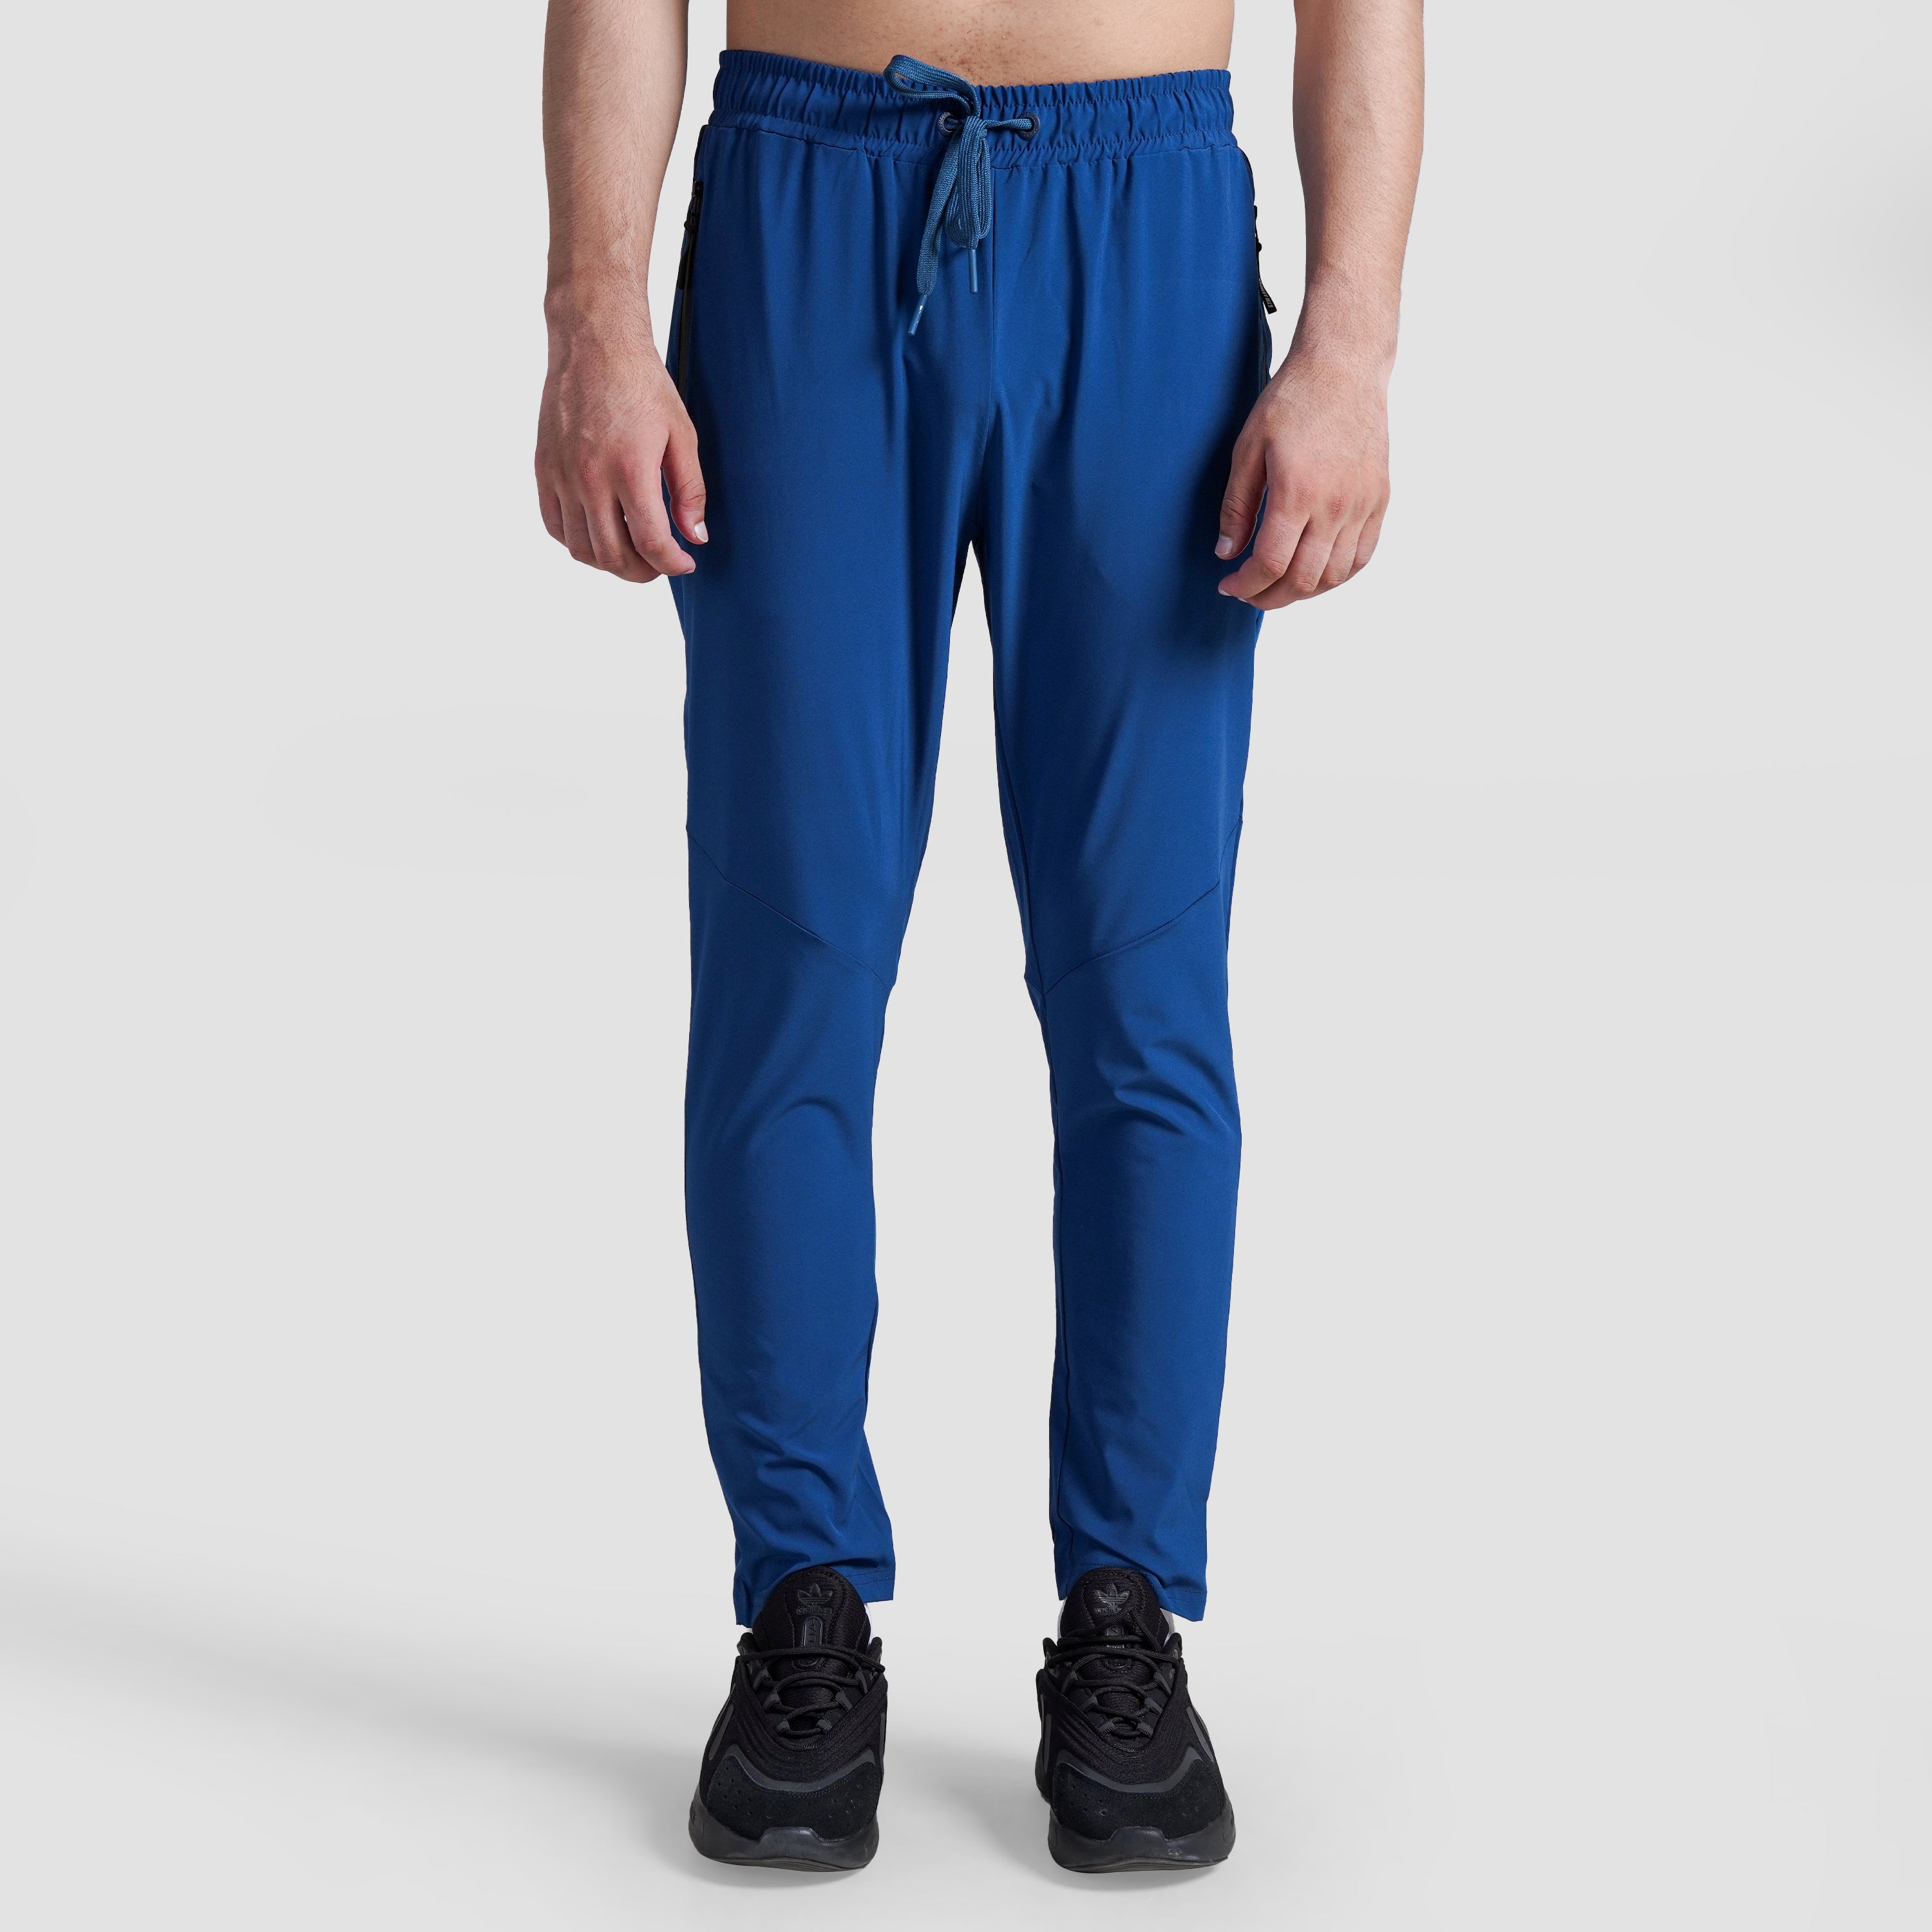 Agility Track Trousers (Teal)